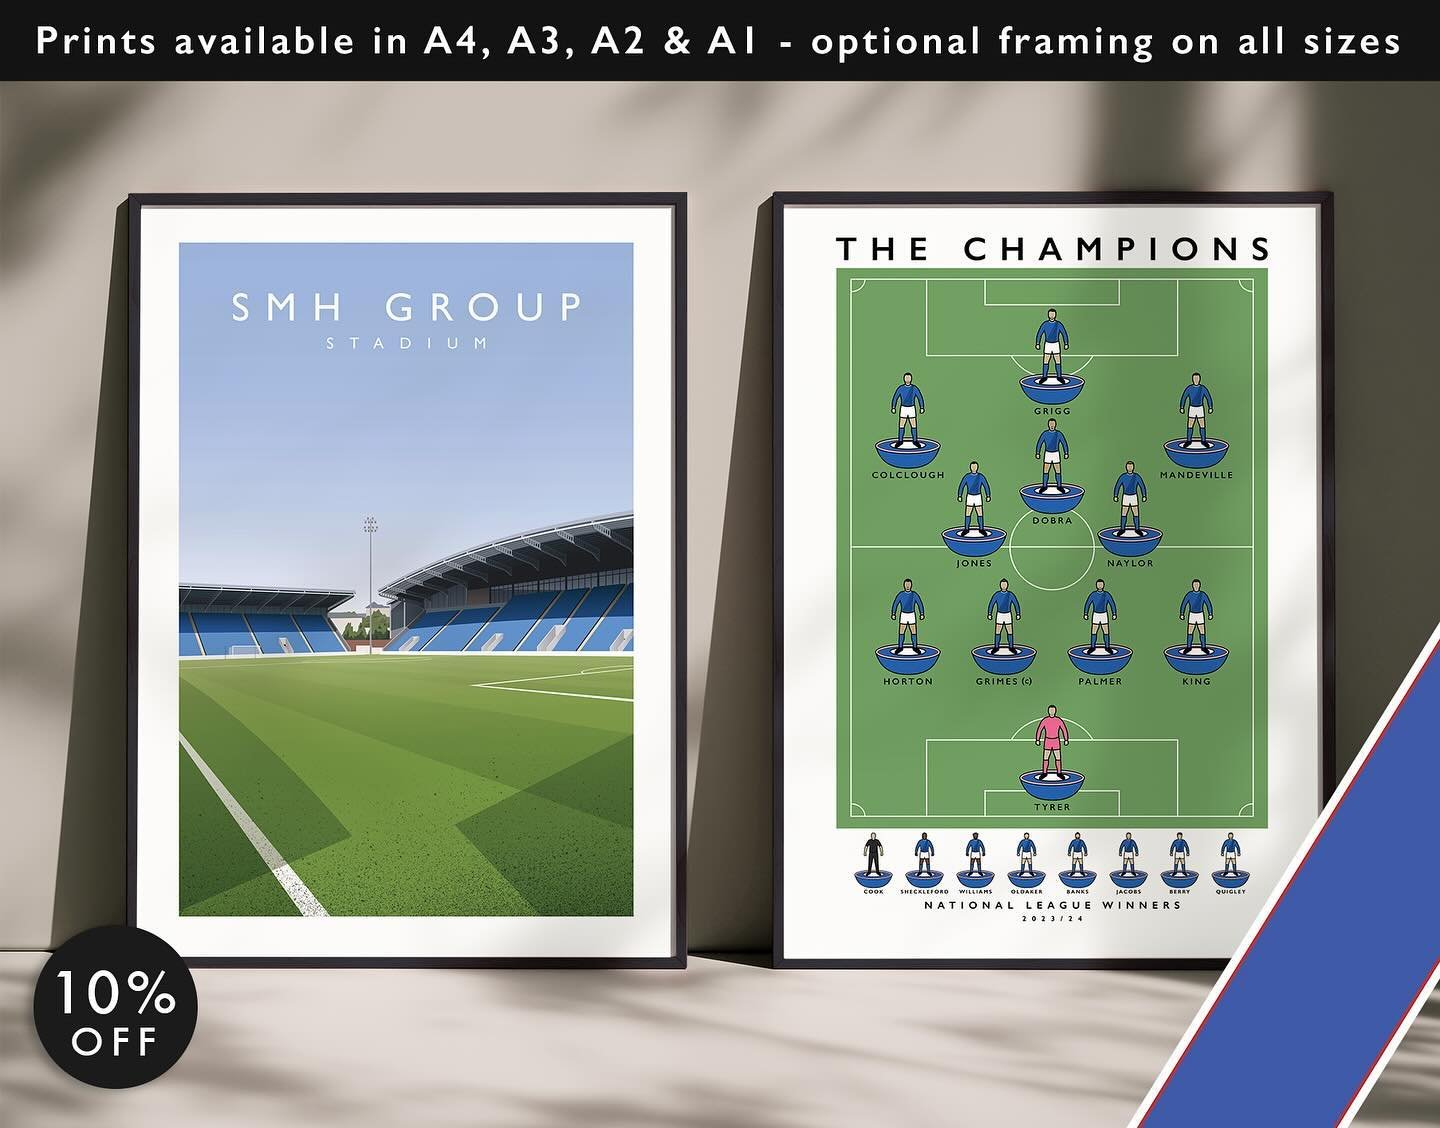 SMH Group Stadium &amp; Chesterfield FC The Champions 23/24 

Prints available in A4, A3, A2 &amp; A1 with optional framing 

Get 10% off until midnight with the discount code
THE-SPIREITES 

Visit: matthewjiwood.com/subbuteo-teams&hellip;

#Chesterf